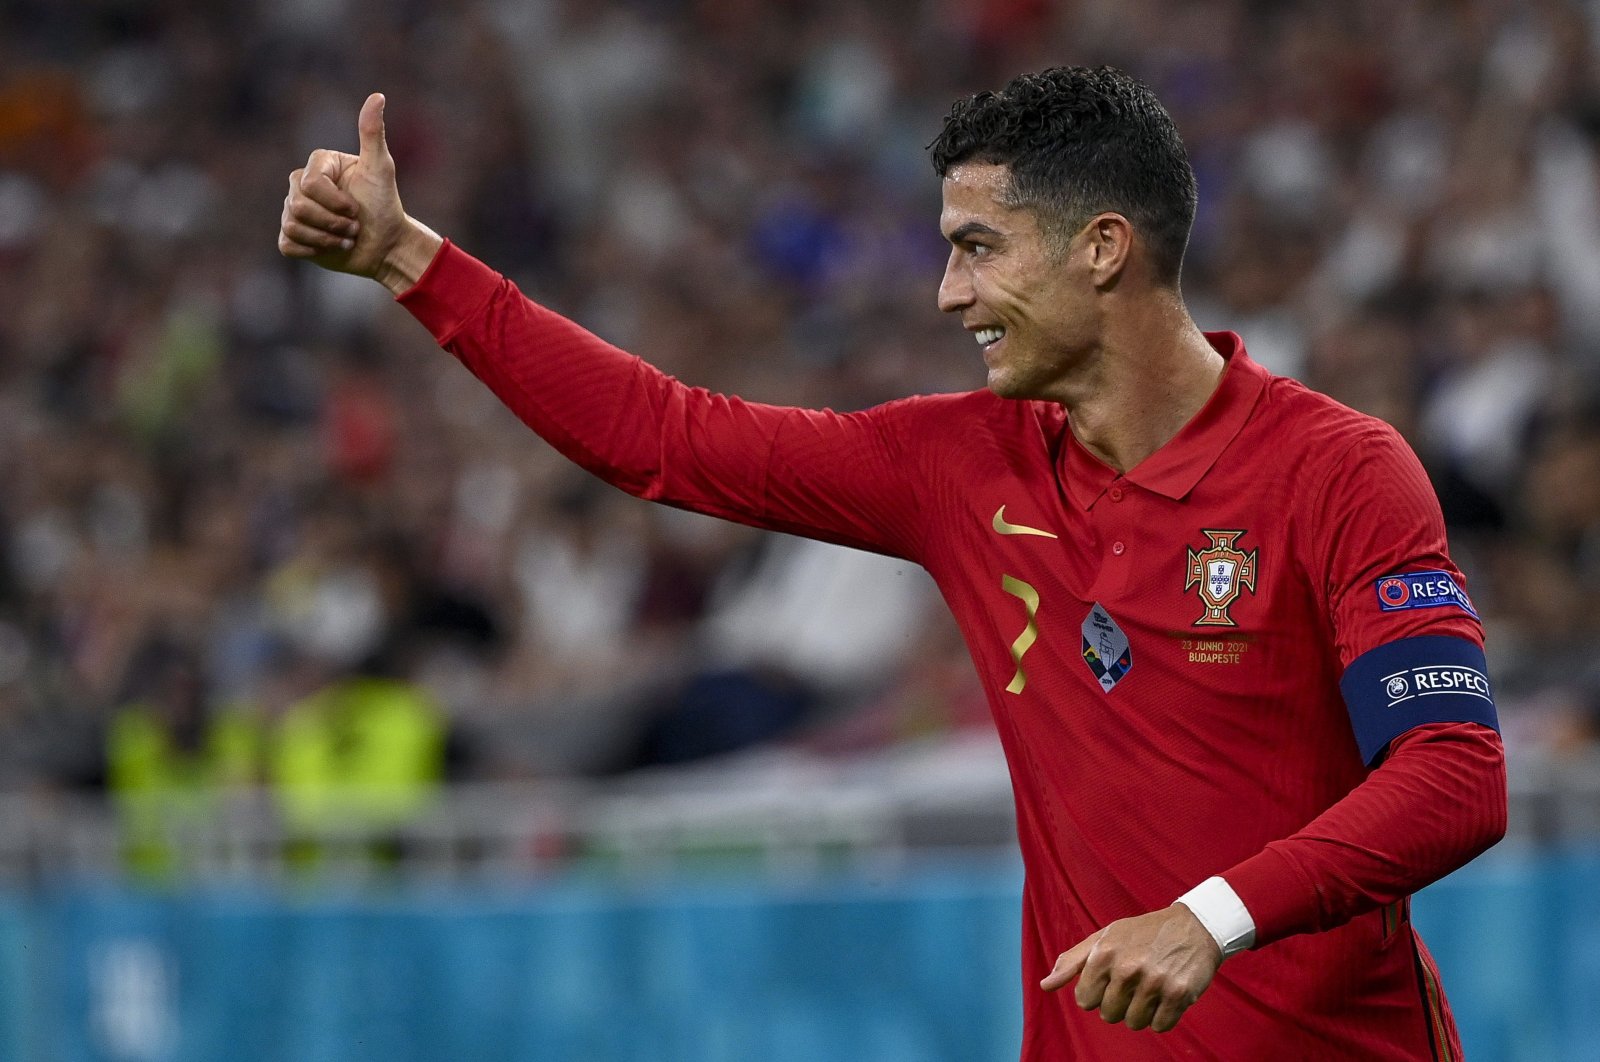 Cristiano Ronaldo of Portugal celebrates after scoring a goal during the Portugal-France match in the third round of Group F of the Euro 2020 soccer tournament in Puskas Ferenc Arena in Budapest, Hungary, June 23, 2021. (EPA Photo)